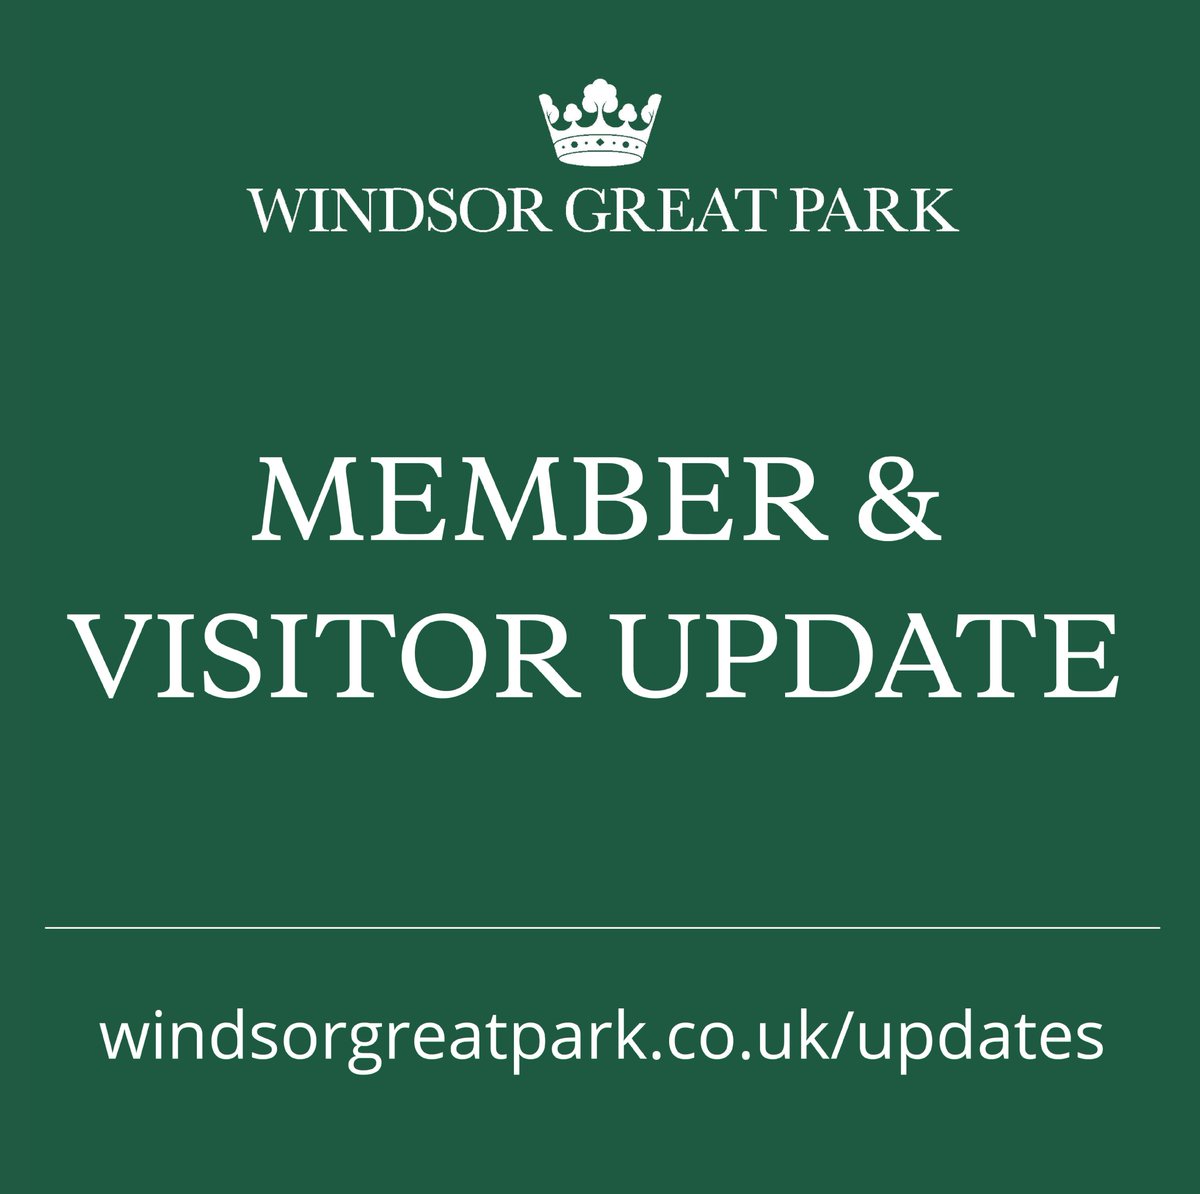 Please be aware that the outdoor seating terrace for the Virginia Water Café will be closed from Monday 4 March 2024 for essential maintenance work. The terrace will re-open on Saturday 16 March. For further information please check visitor updates: windsorgreatpark.co.uk/updates